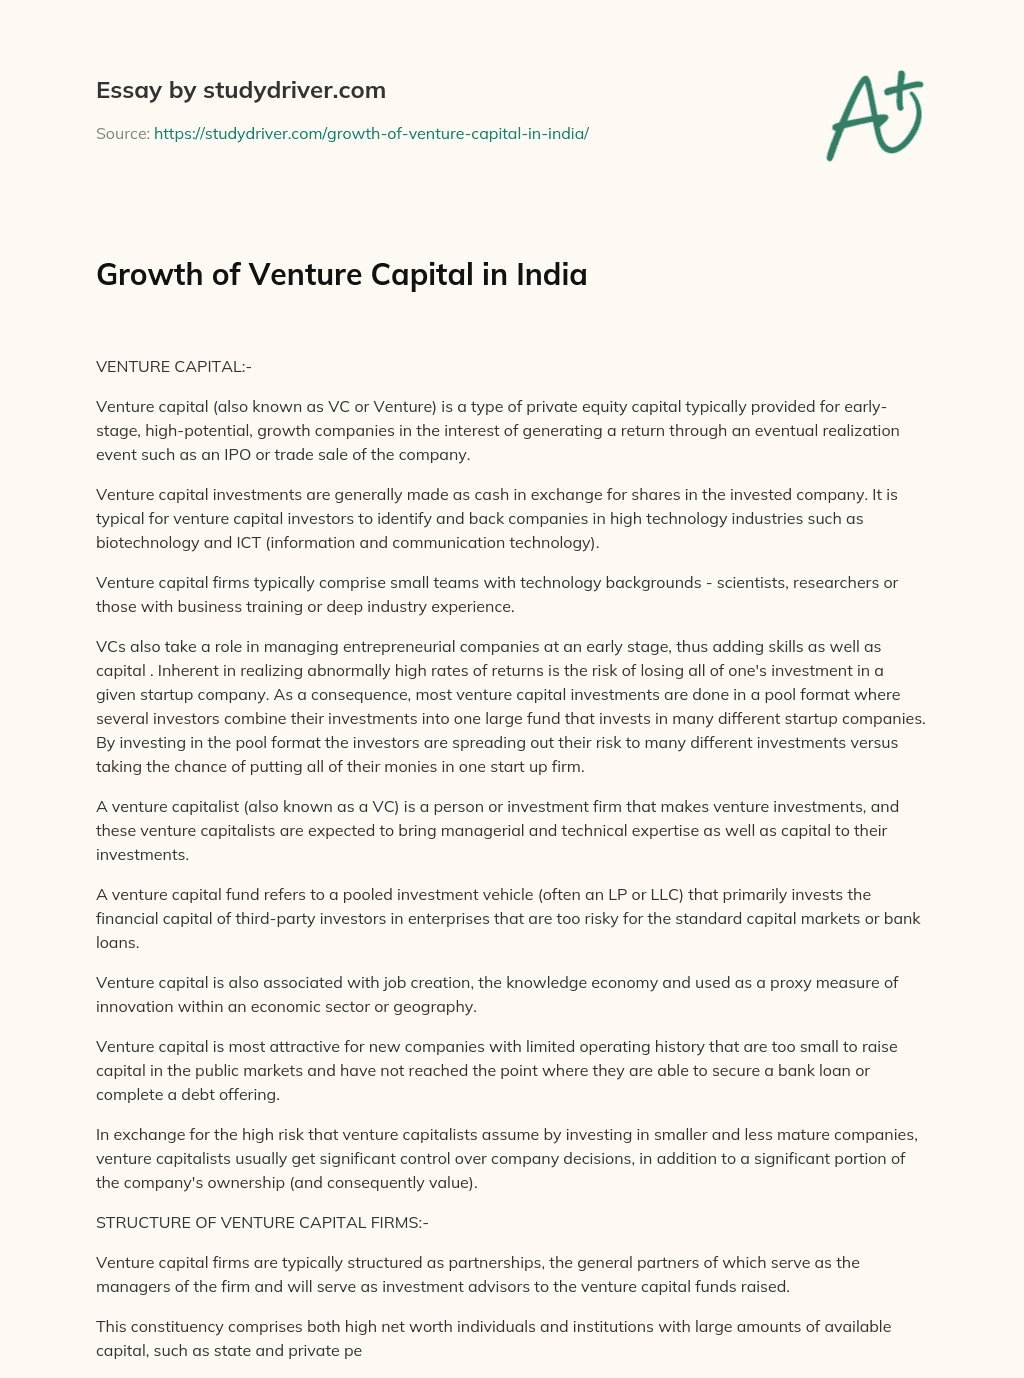 Growth of Venture Capital in India essay